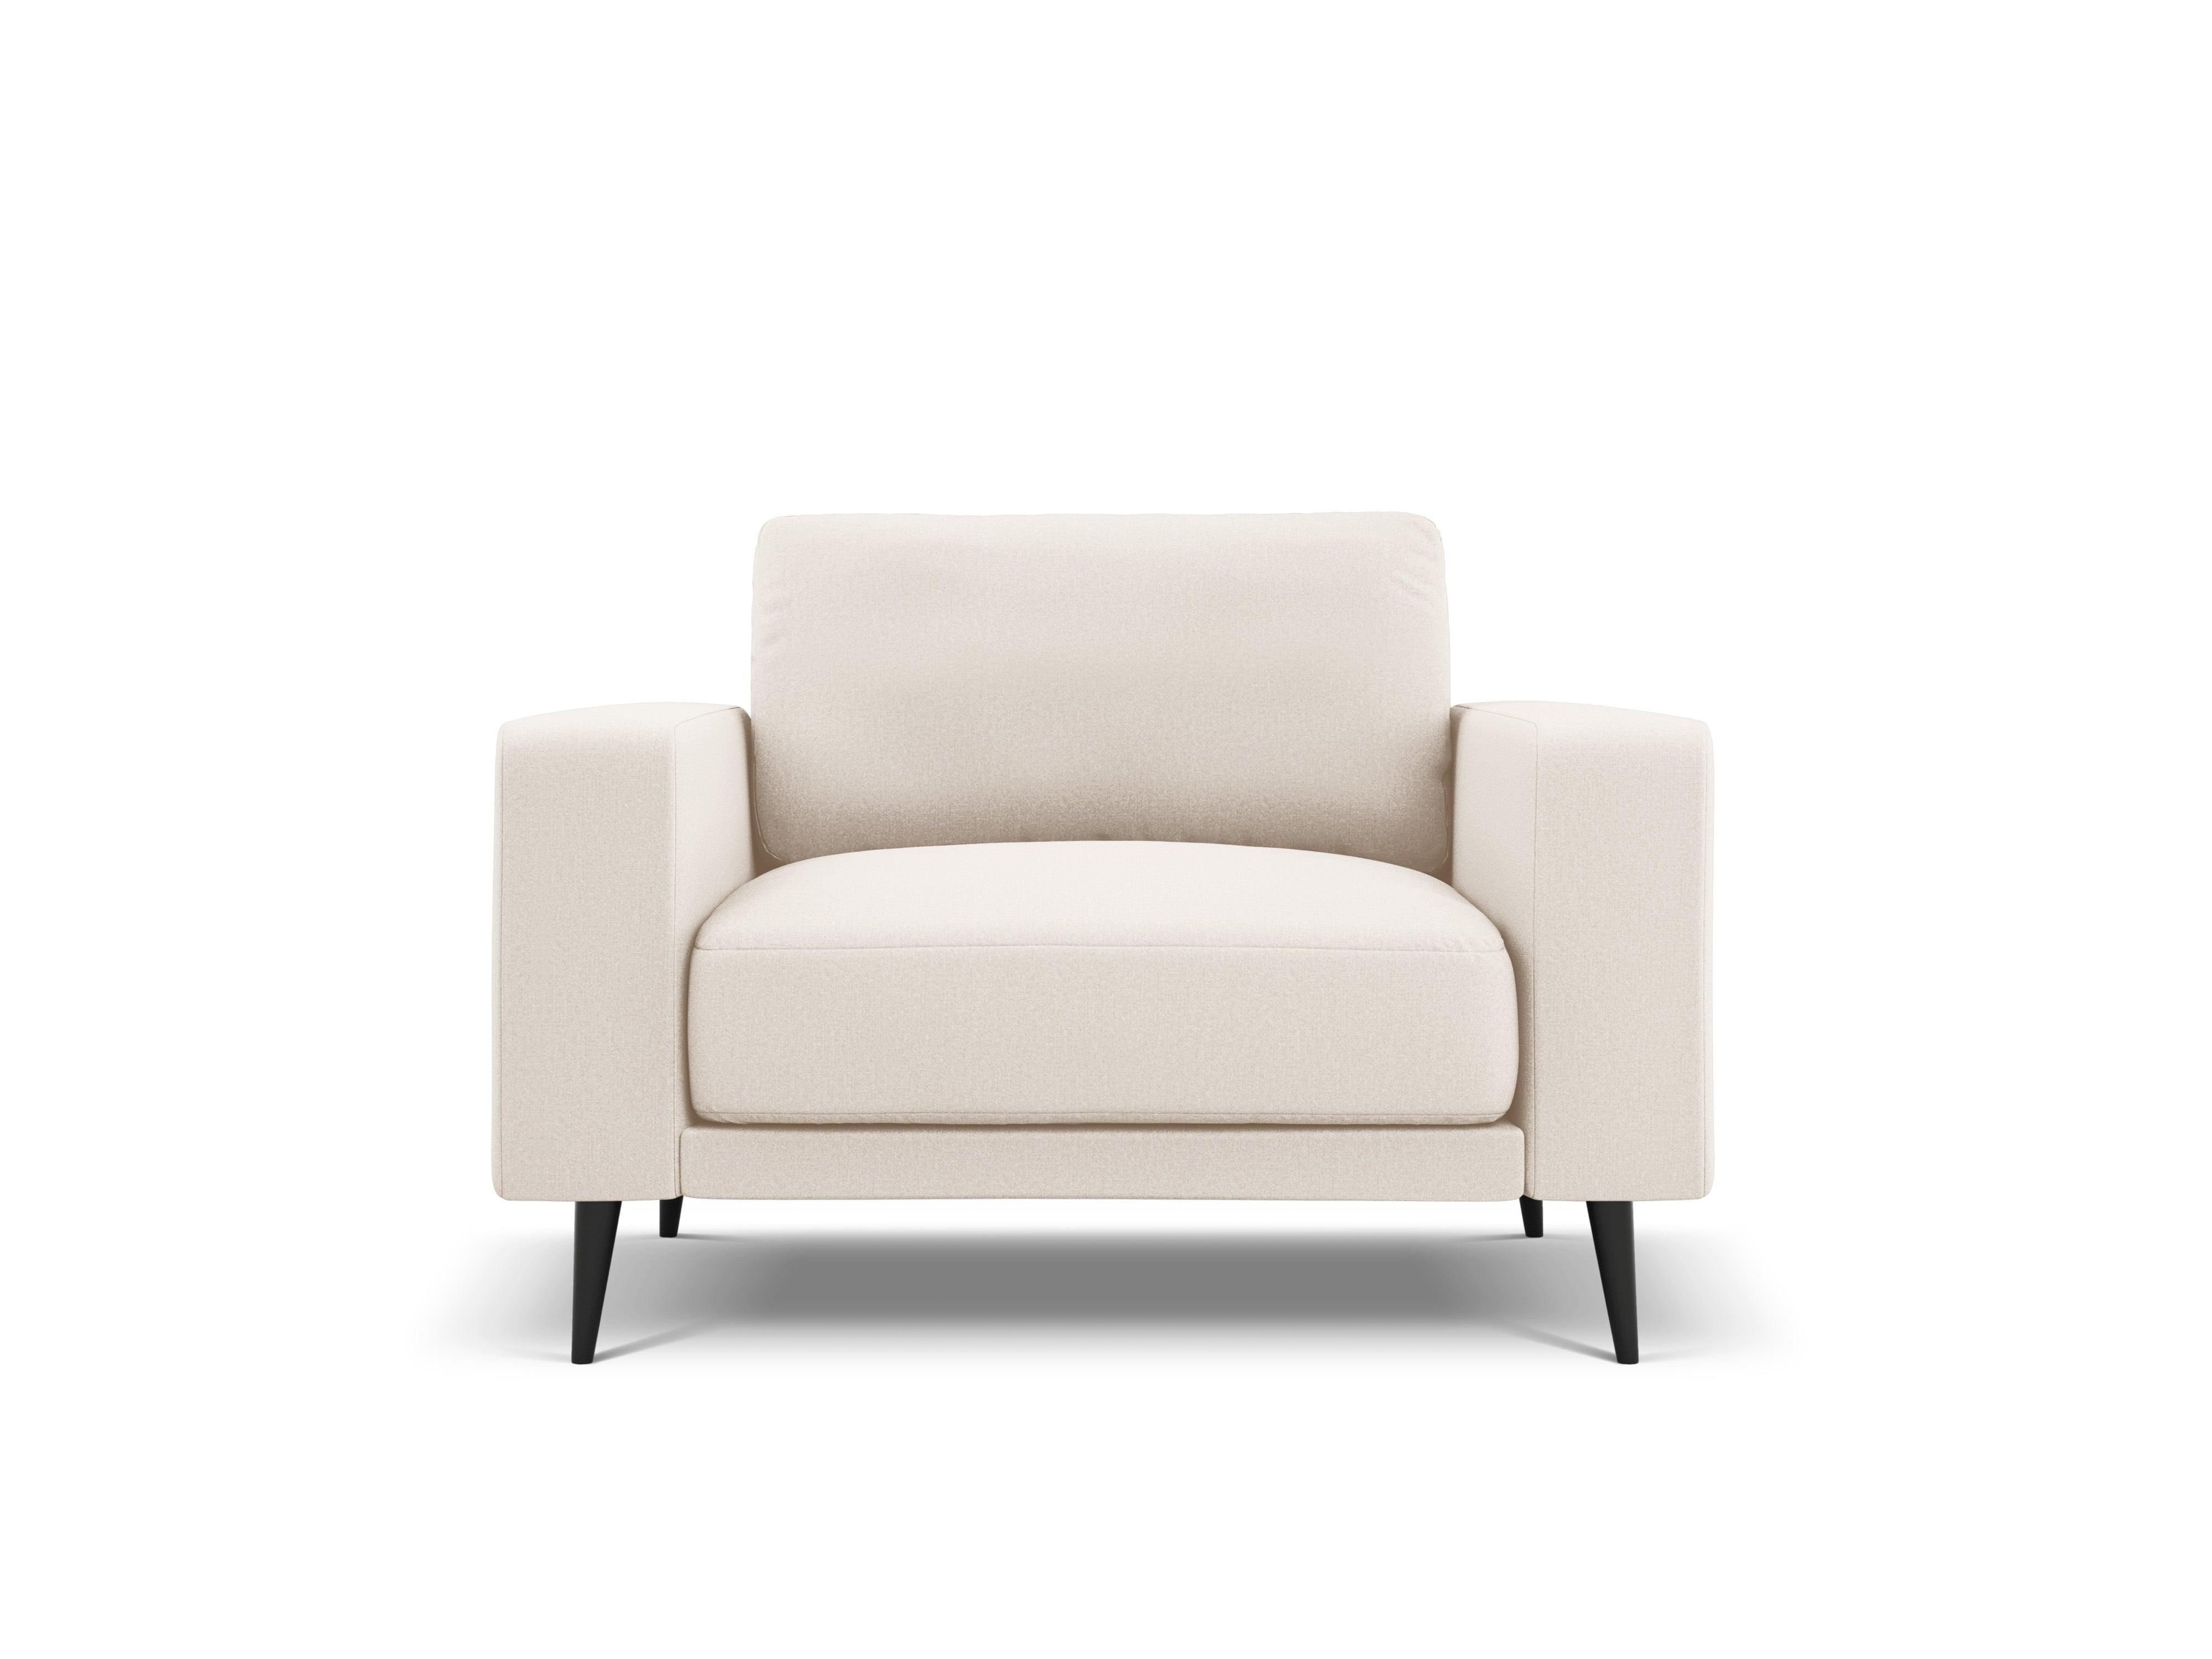 Armchair, "Kylie", 1 Seat, 97x90x80
Made in Europe, Micadoni, Eye on Design